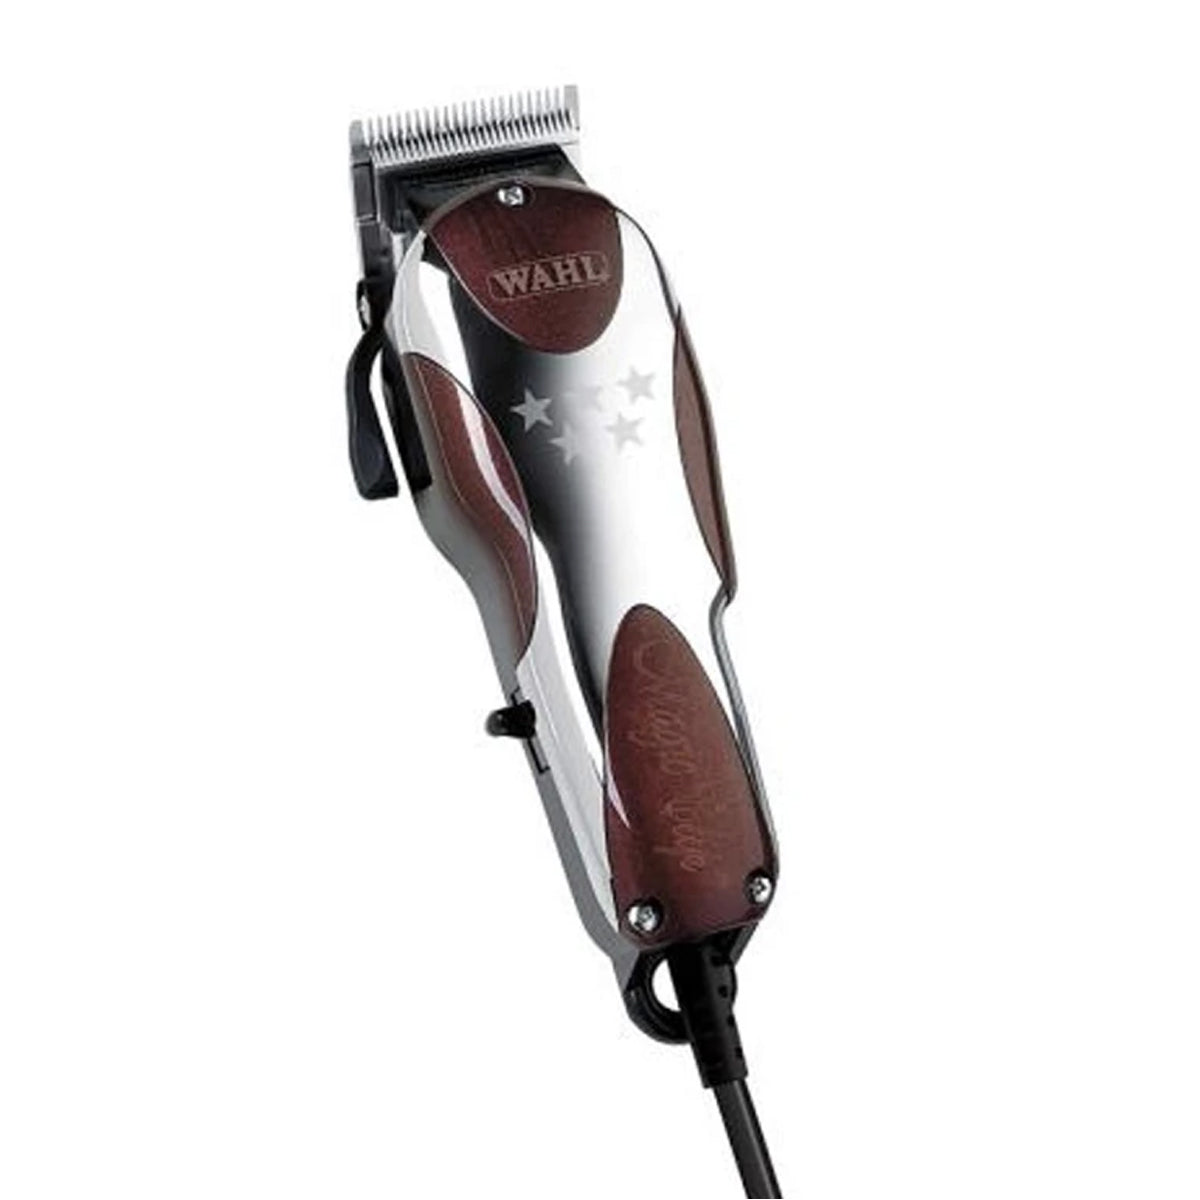 WAHL NOT WIRELESS MAGIC CLIP 8451